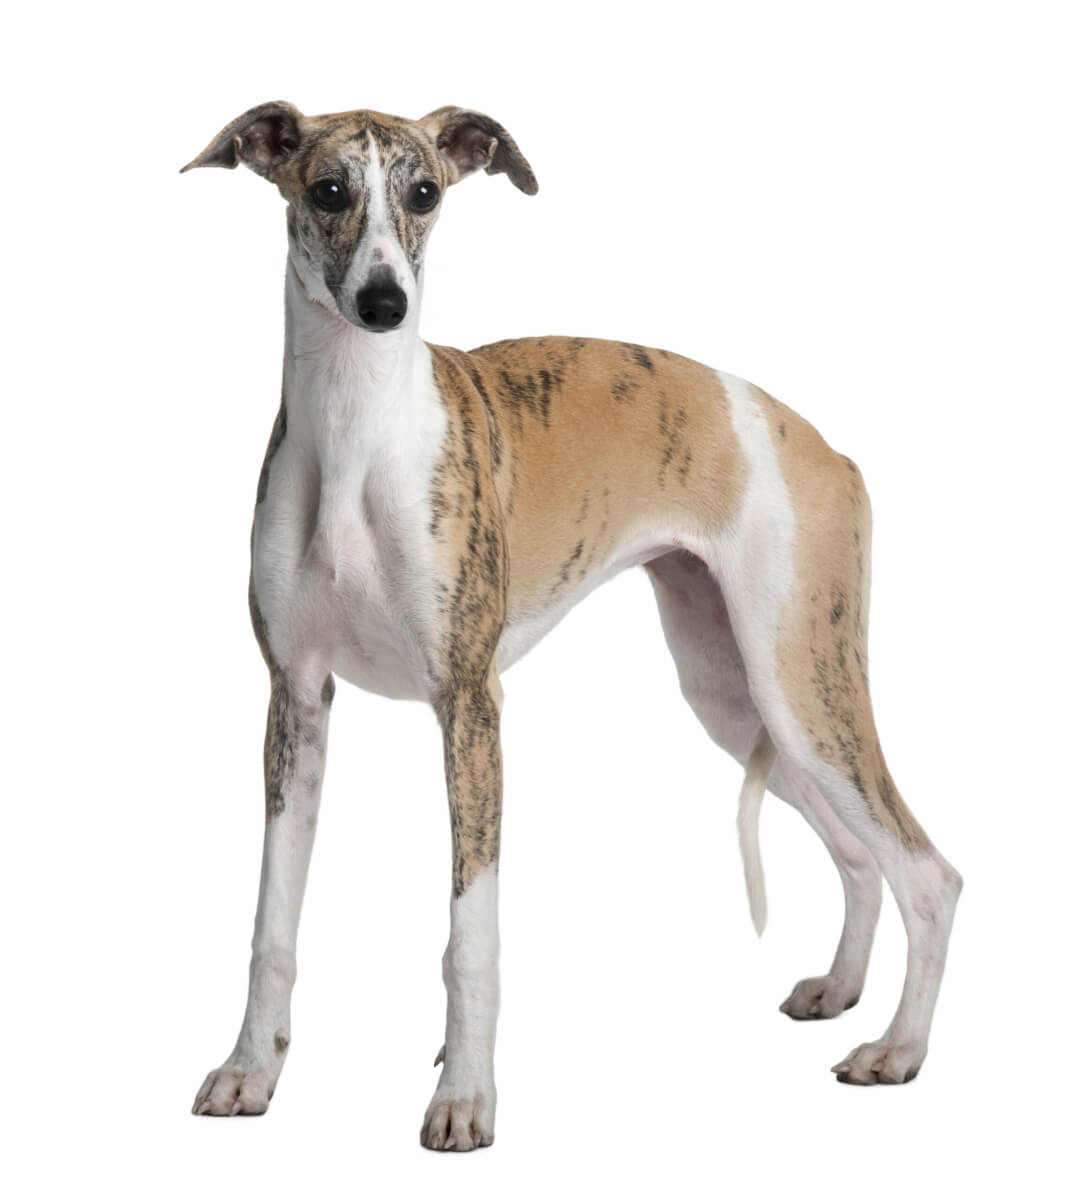 A young Whippet